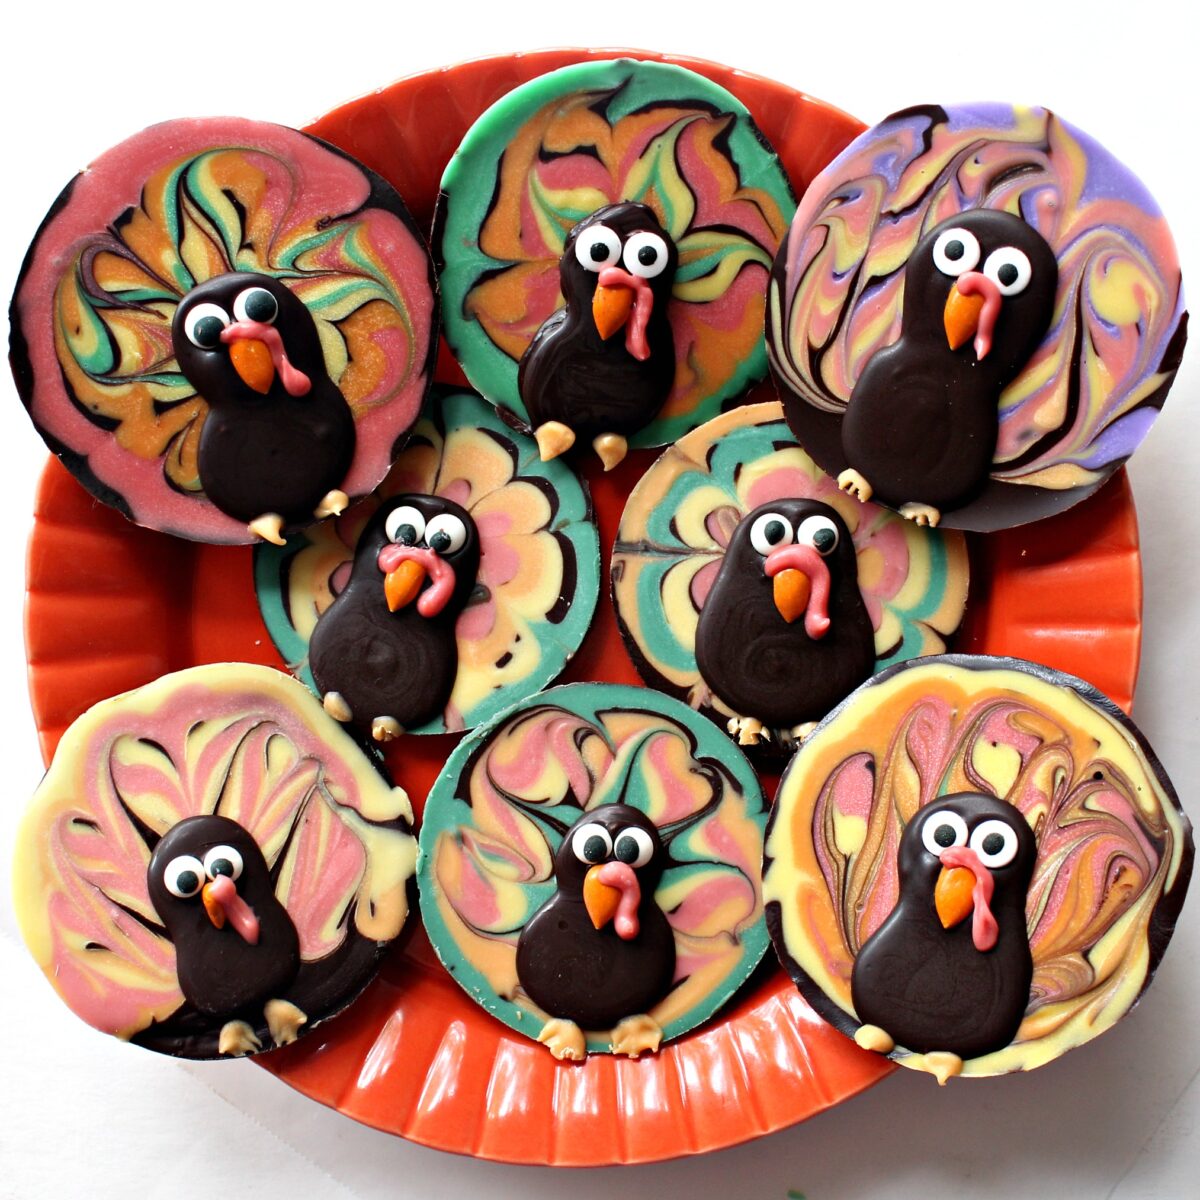 Decorated Chocolate Bark Turkeys on a serving plate.